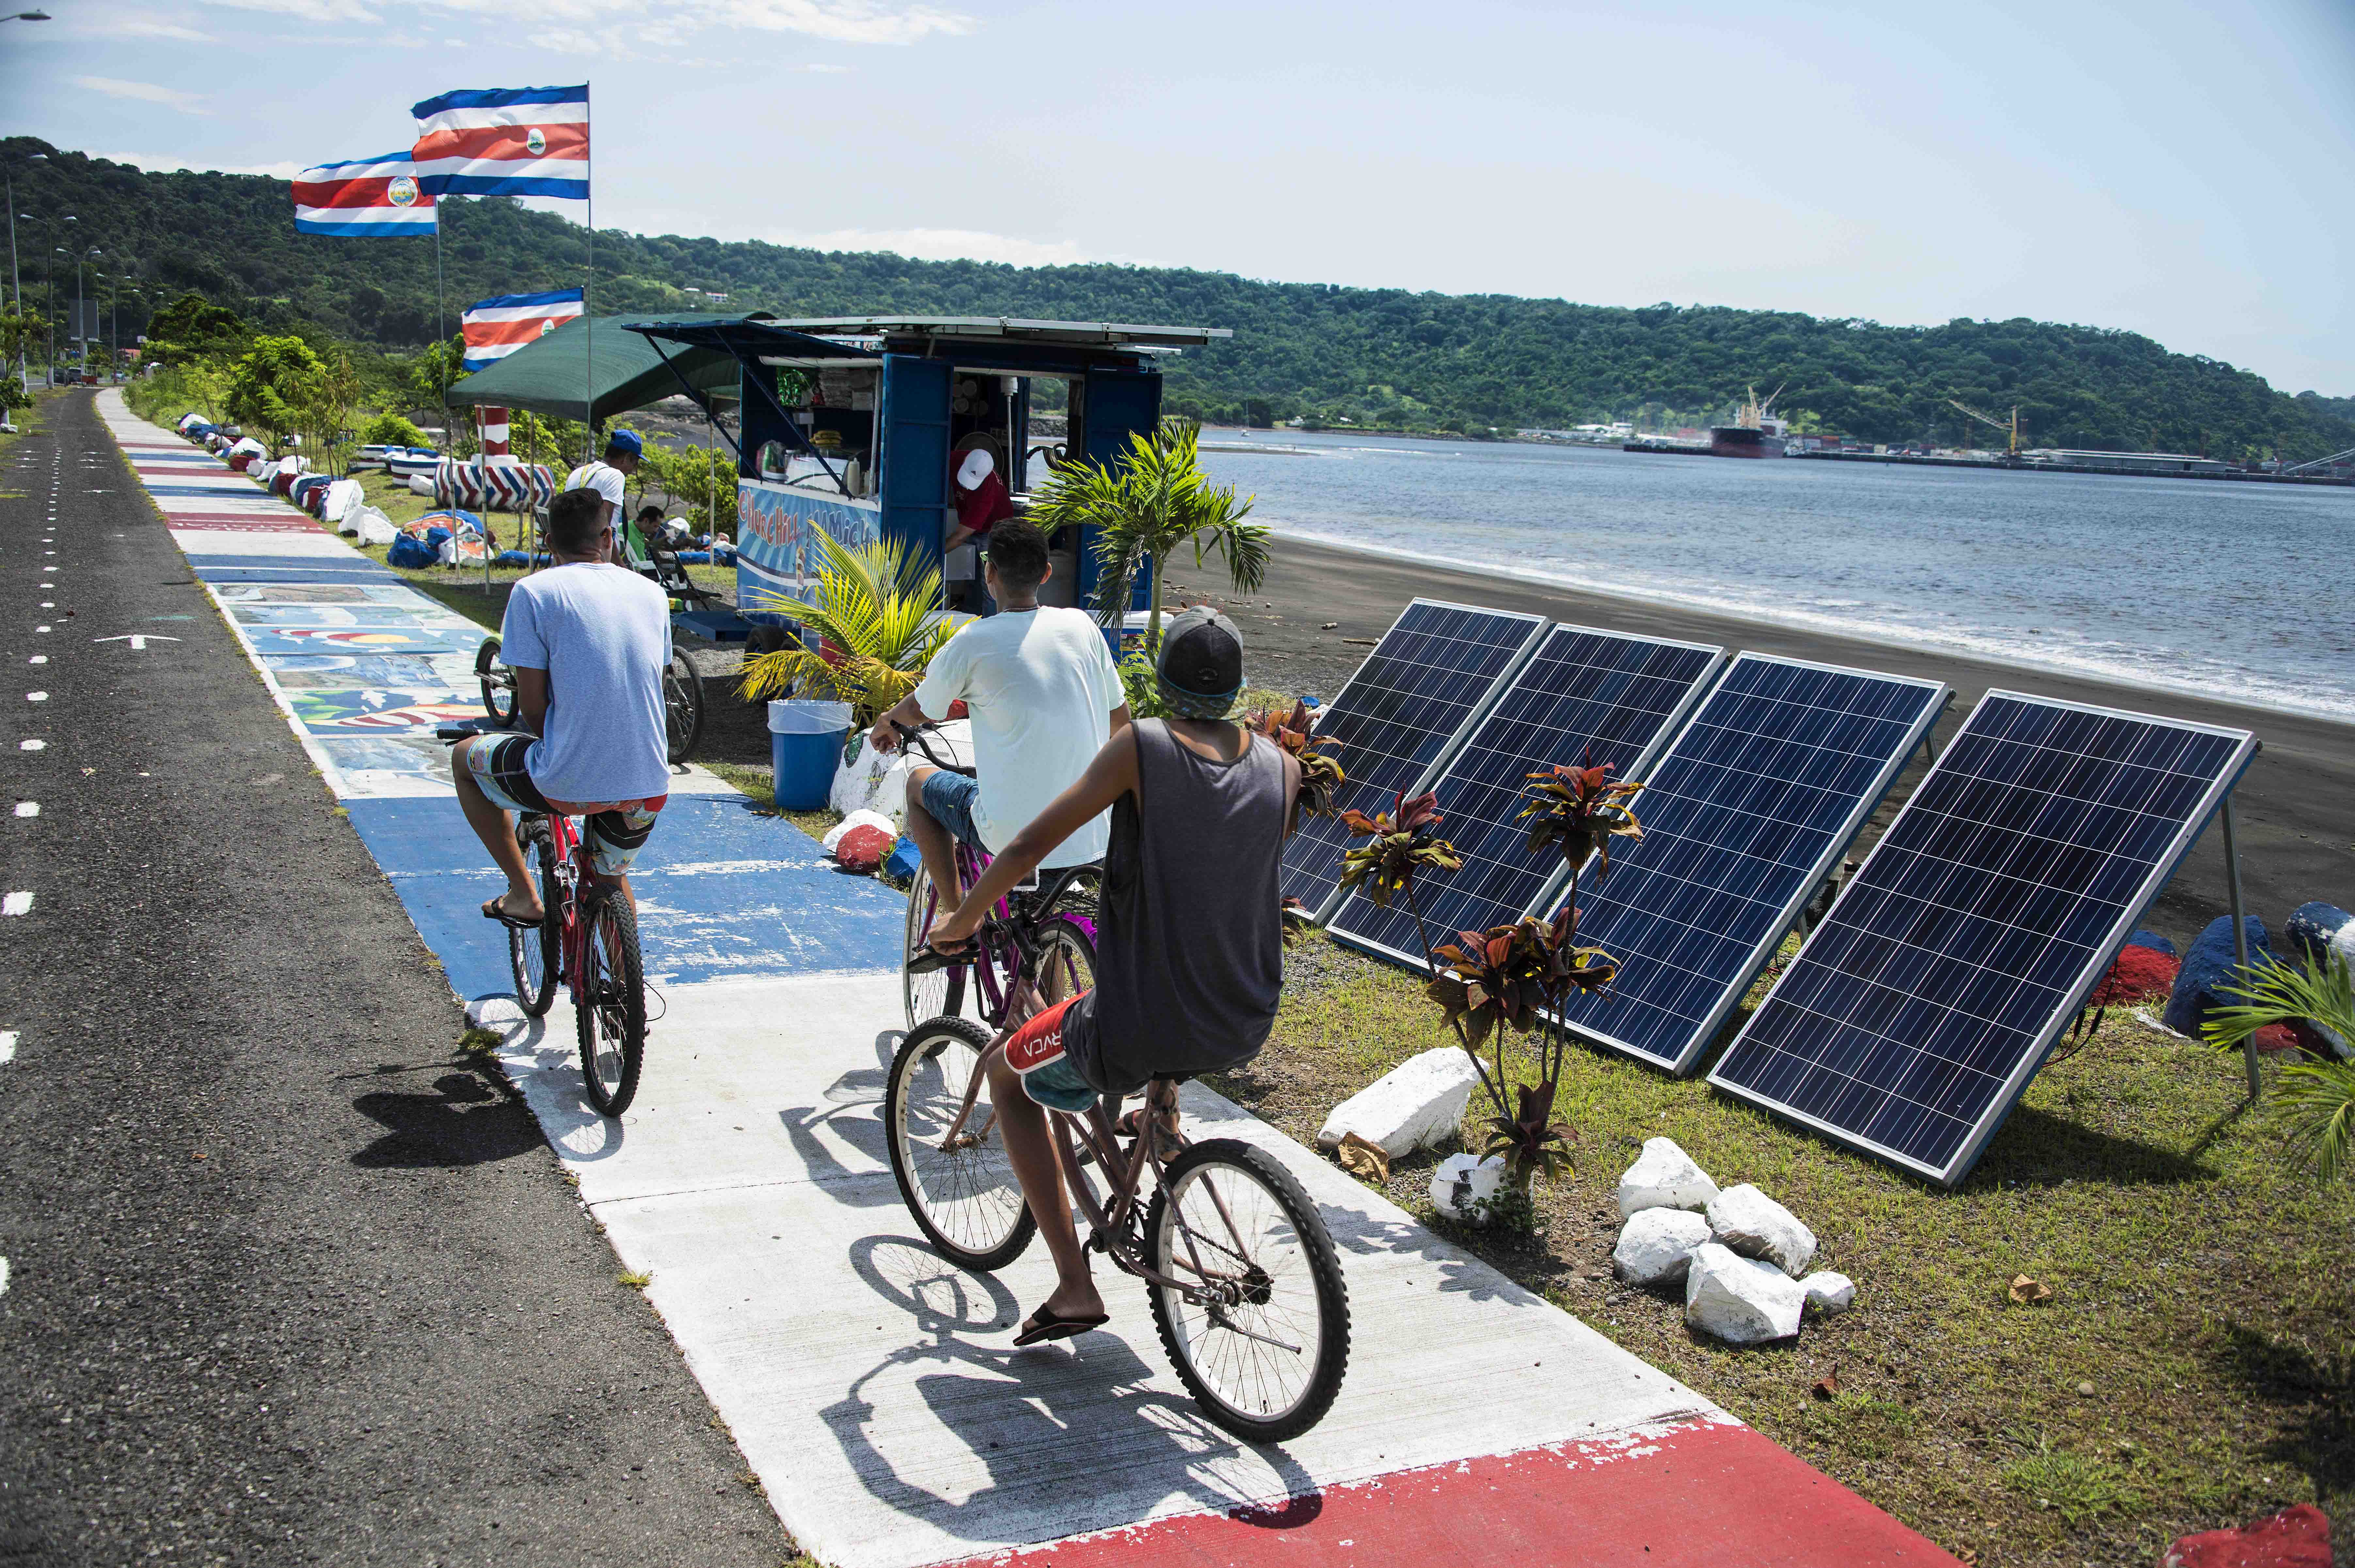 Costa Rica boasts clean energy and bad car pollution